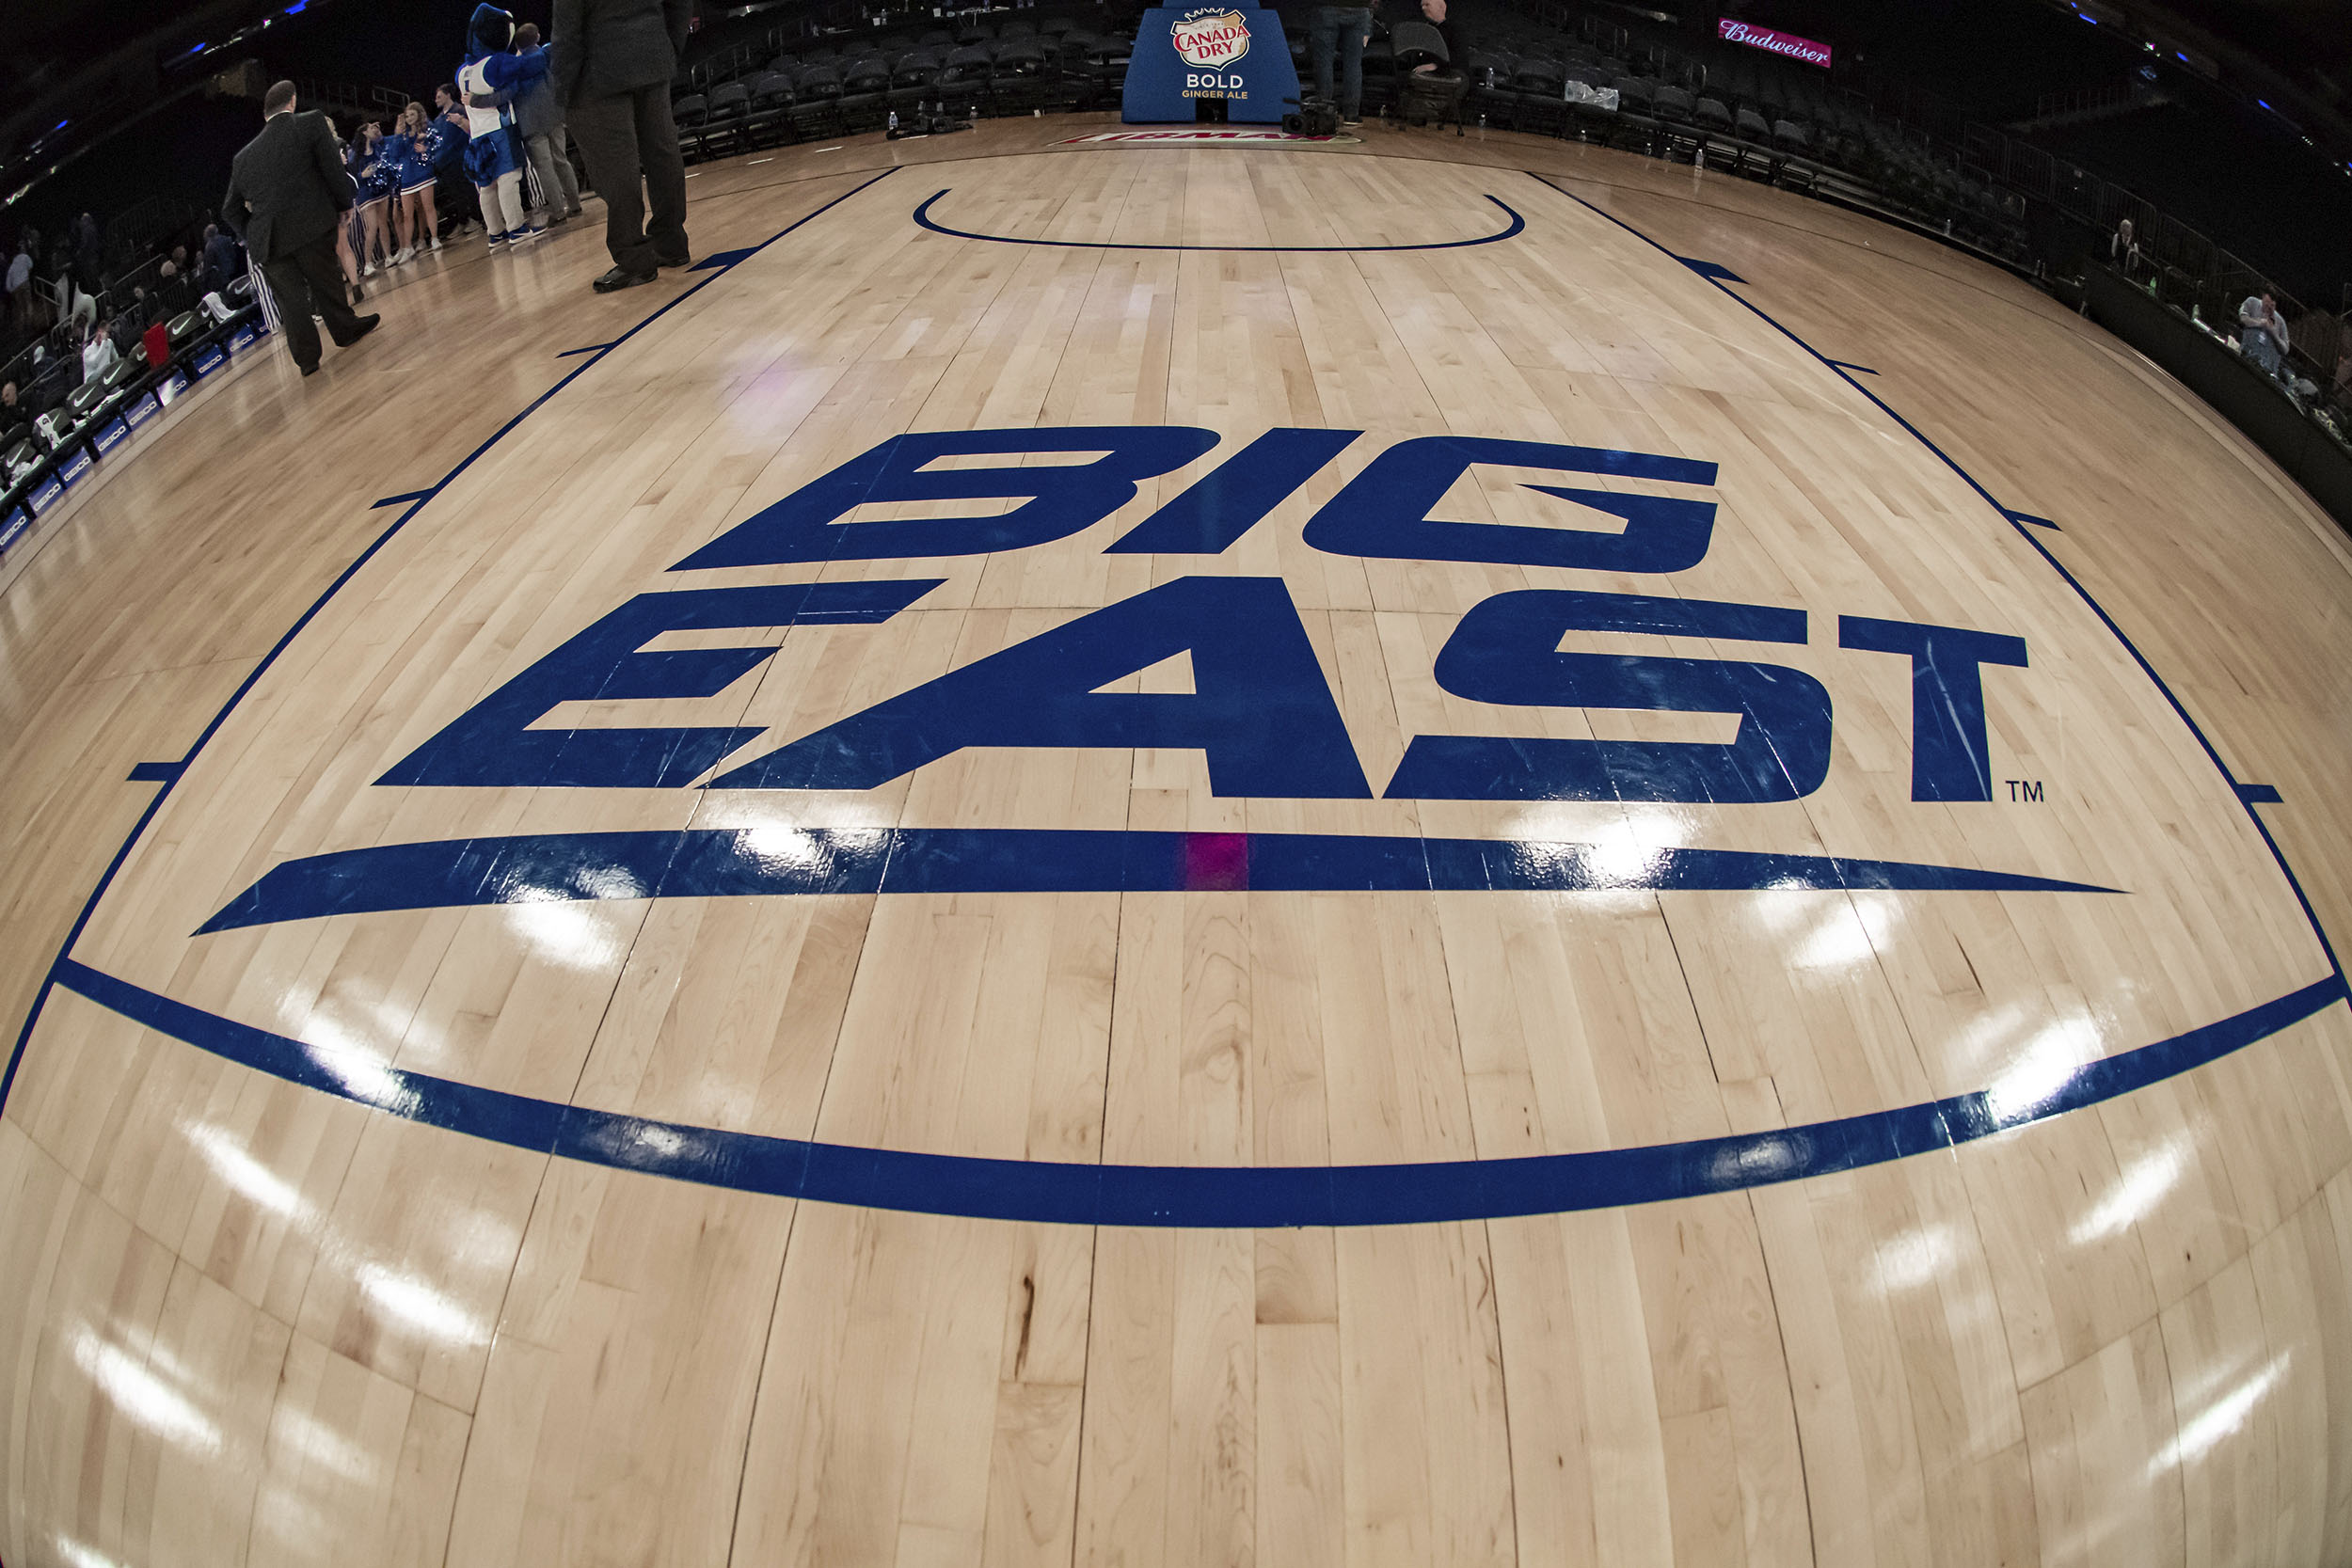 General view of the Big East Conference logo during the first half of a Big East tournament quarterfinal game on March 12, at Madison Square Garden in New York. 